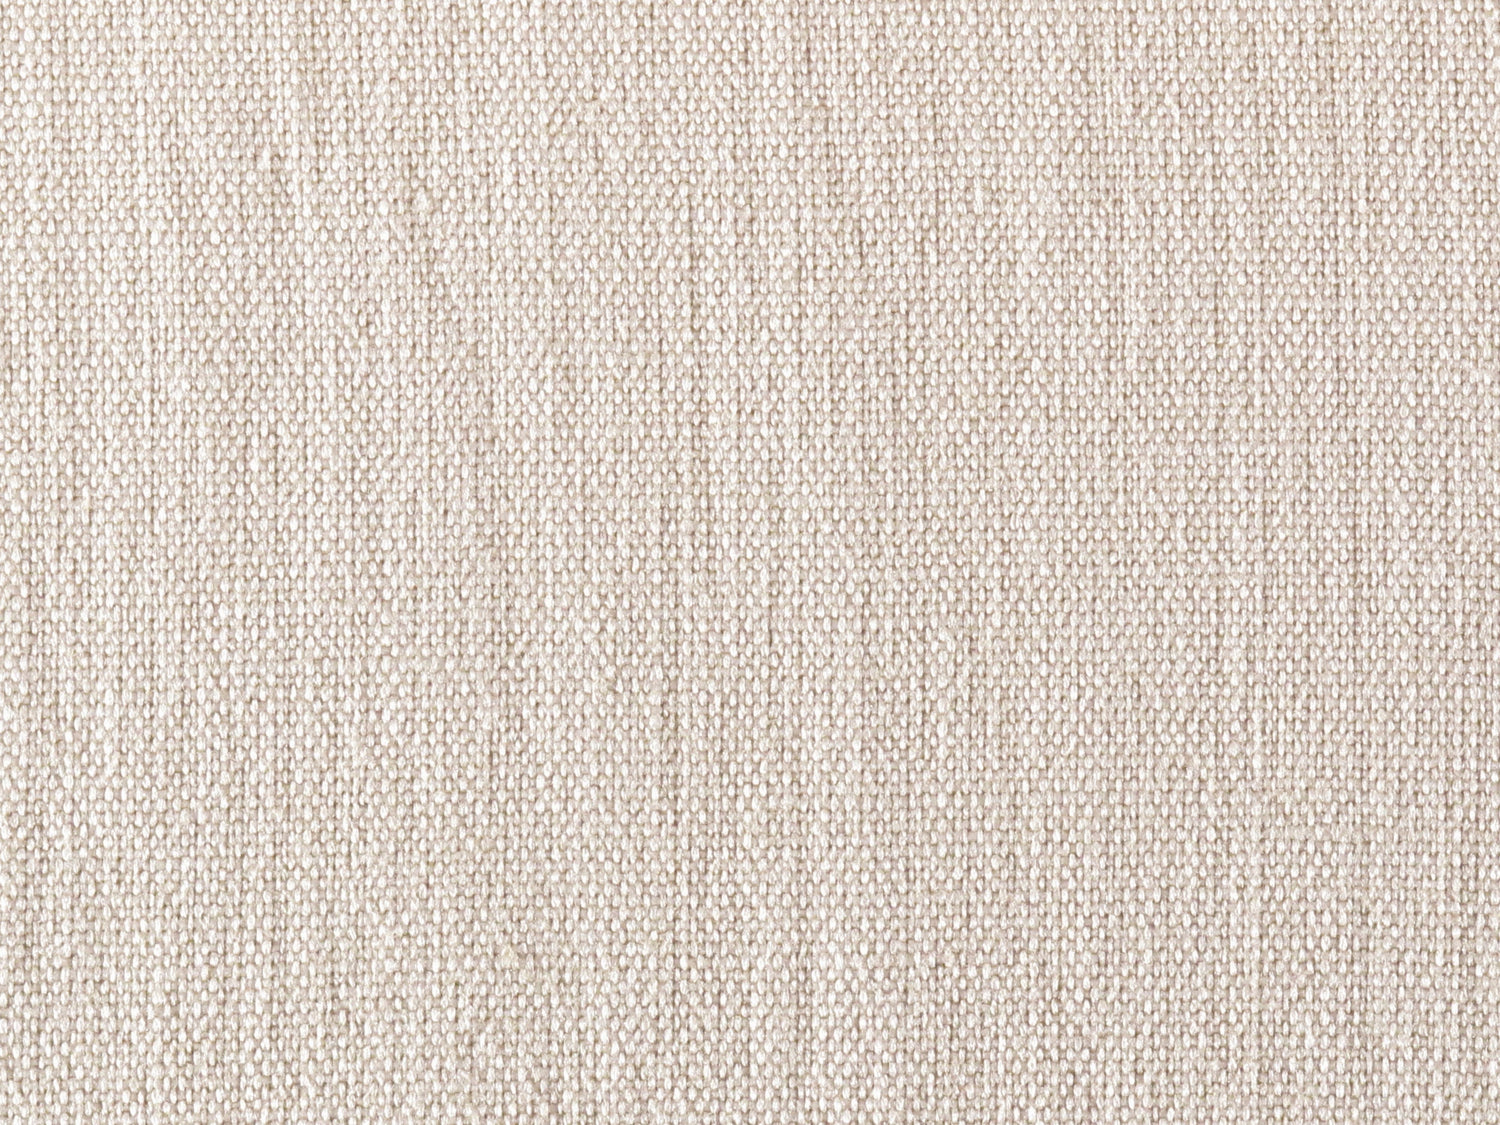 Lakeside Linen fabric in mushroom color - pattern number PK 0017LAKE - by Scalamandre in the Old World Weavers collection